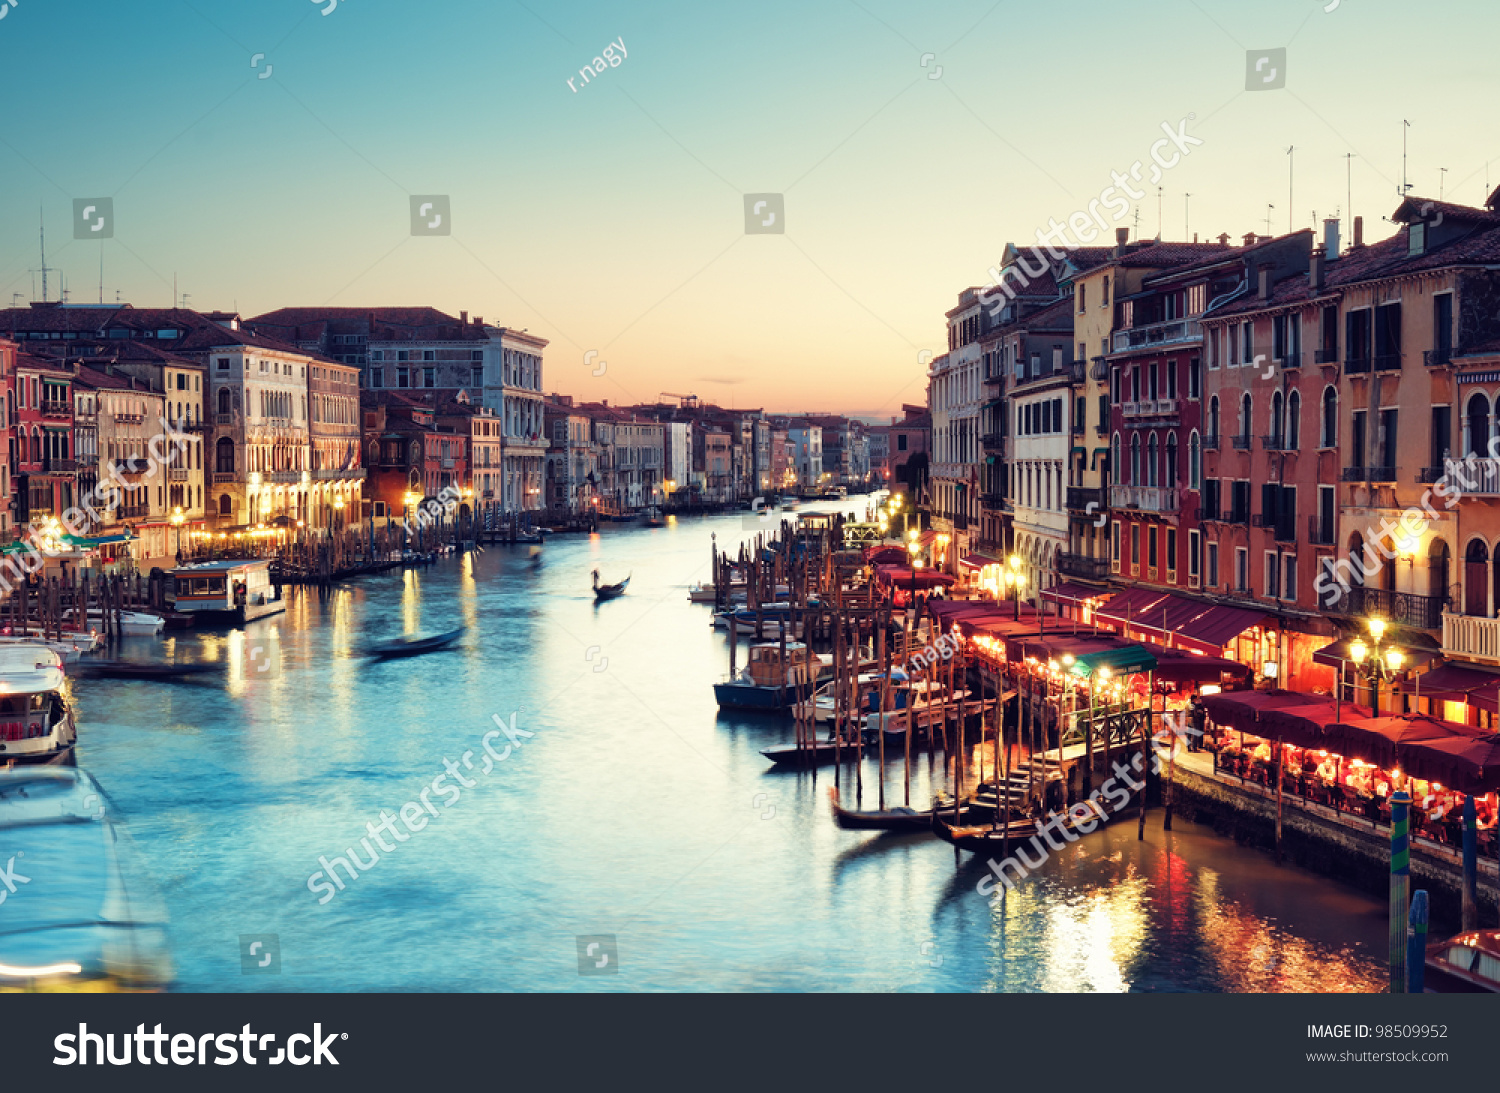 Grand Canal after sunset, Venice - Italy #98509952